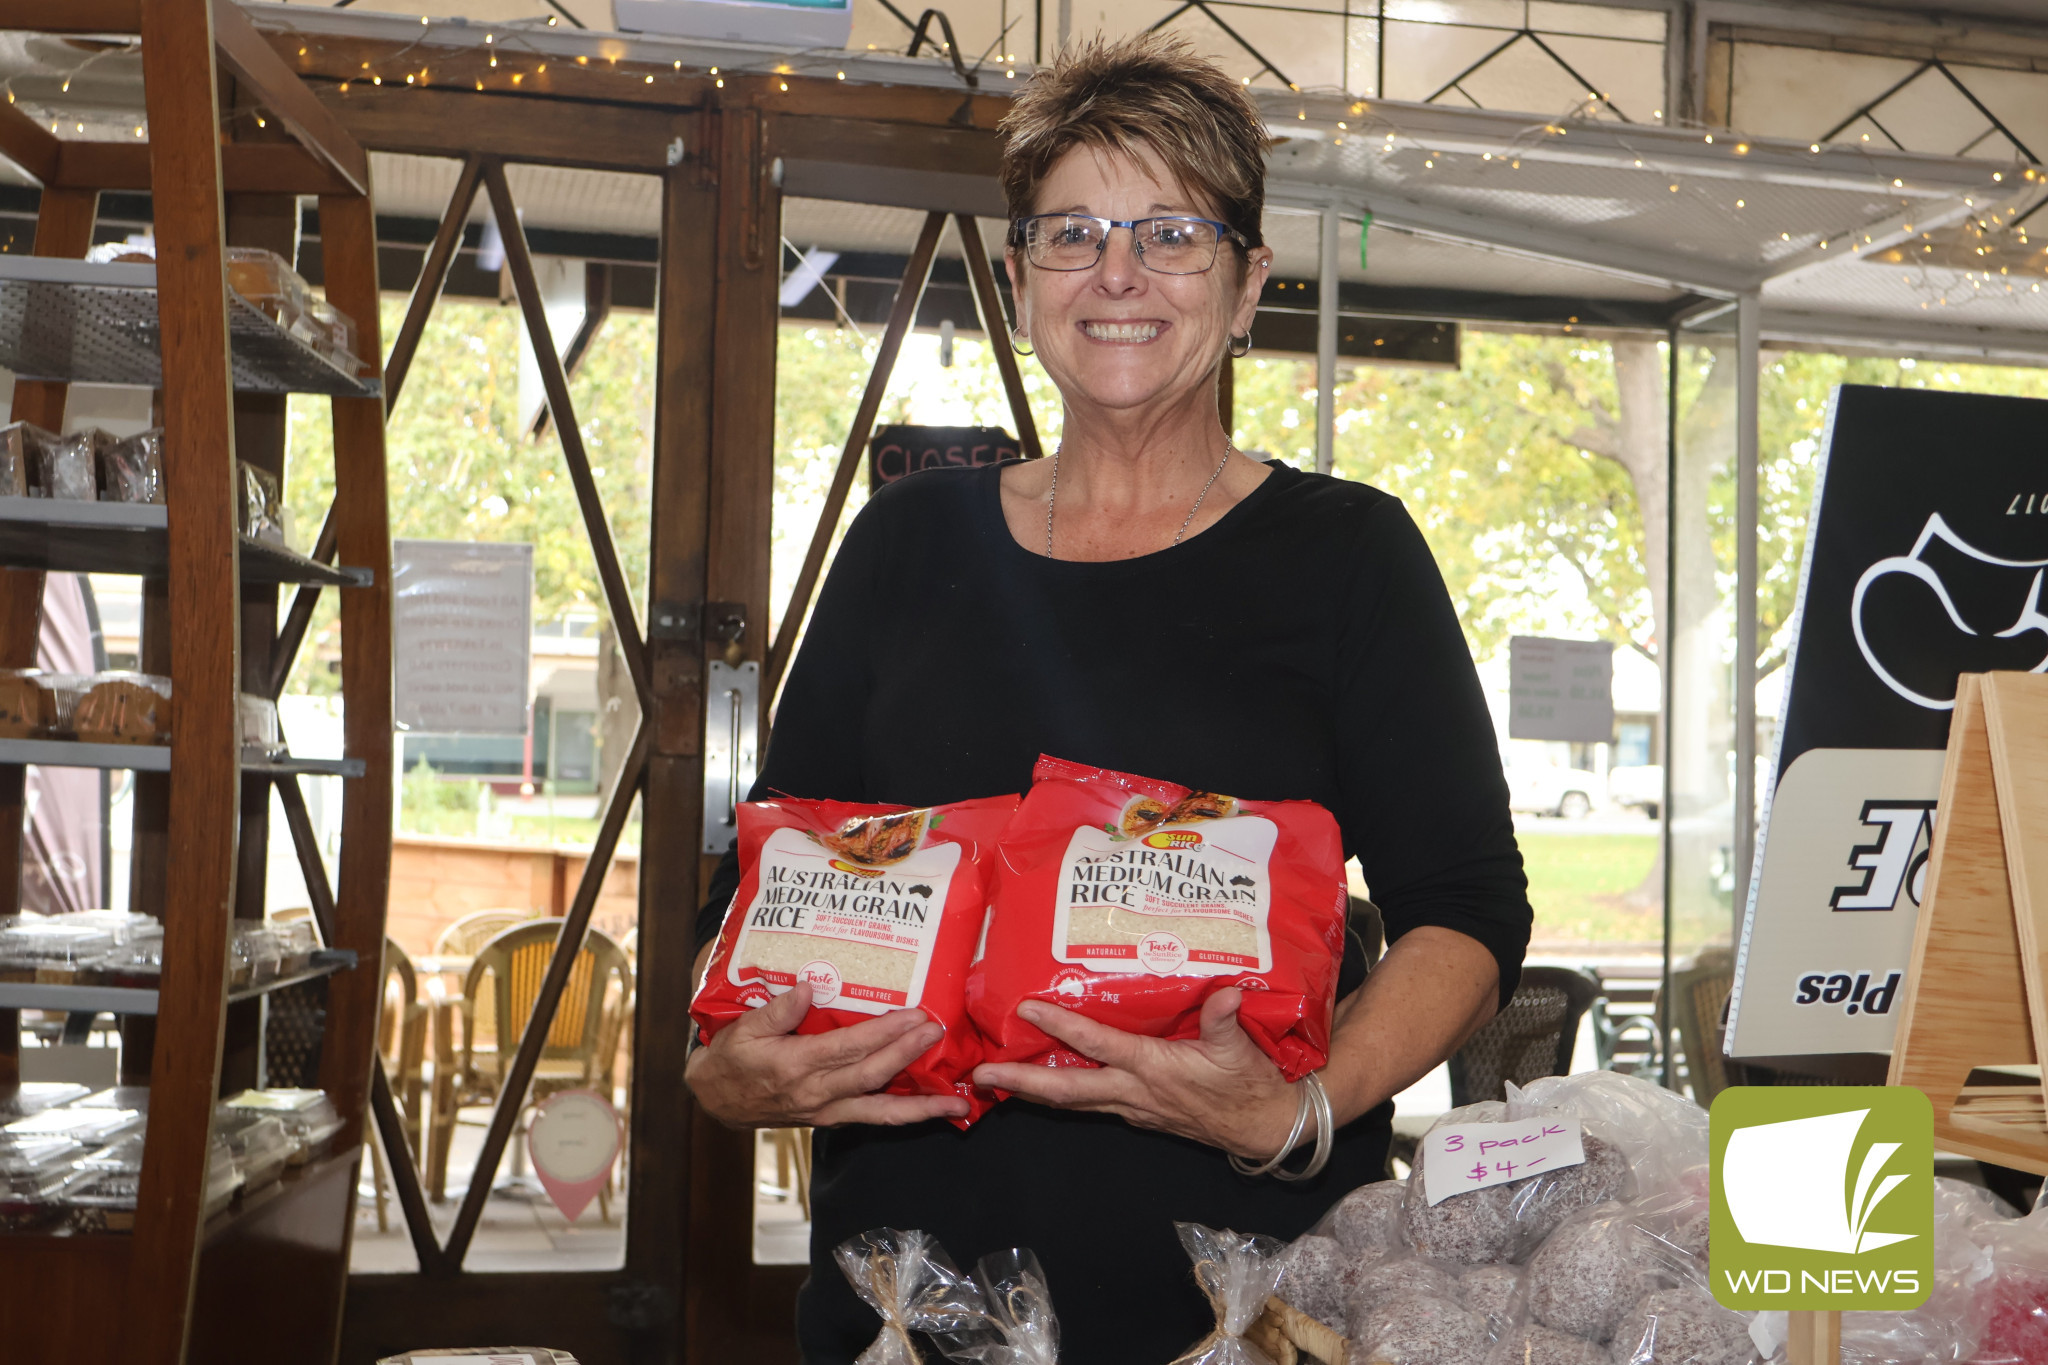 For those in need: Terang Country Bakery owner Gaye McVilly has thanked the community for its generosity as it rallies behind a challenge collecting a much-needed kitchen staple for a local not-for-profit organisation.